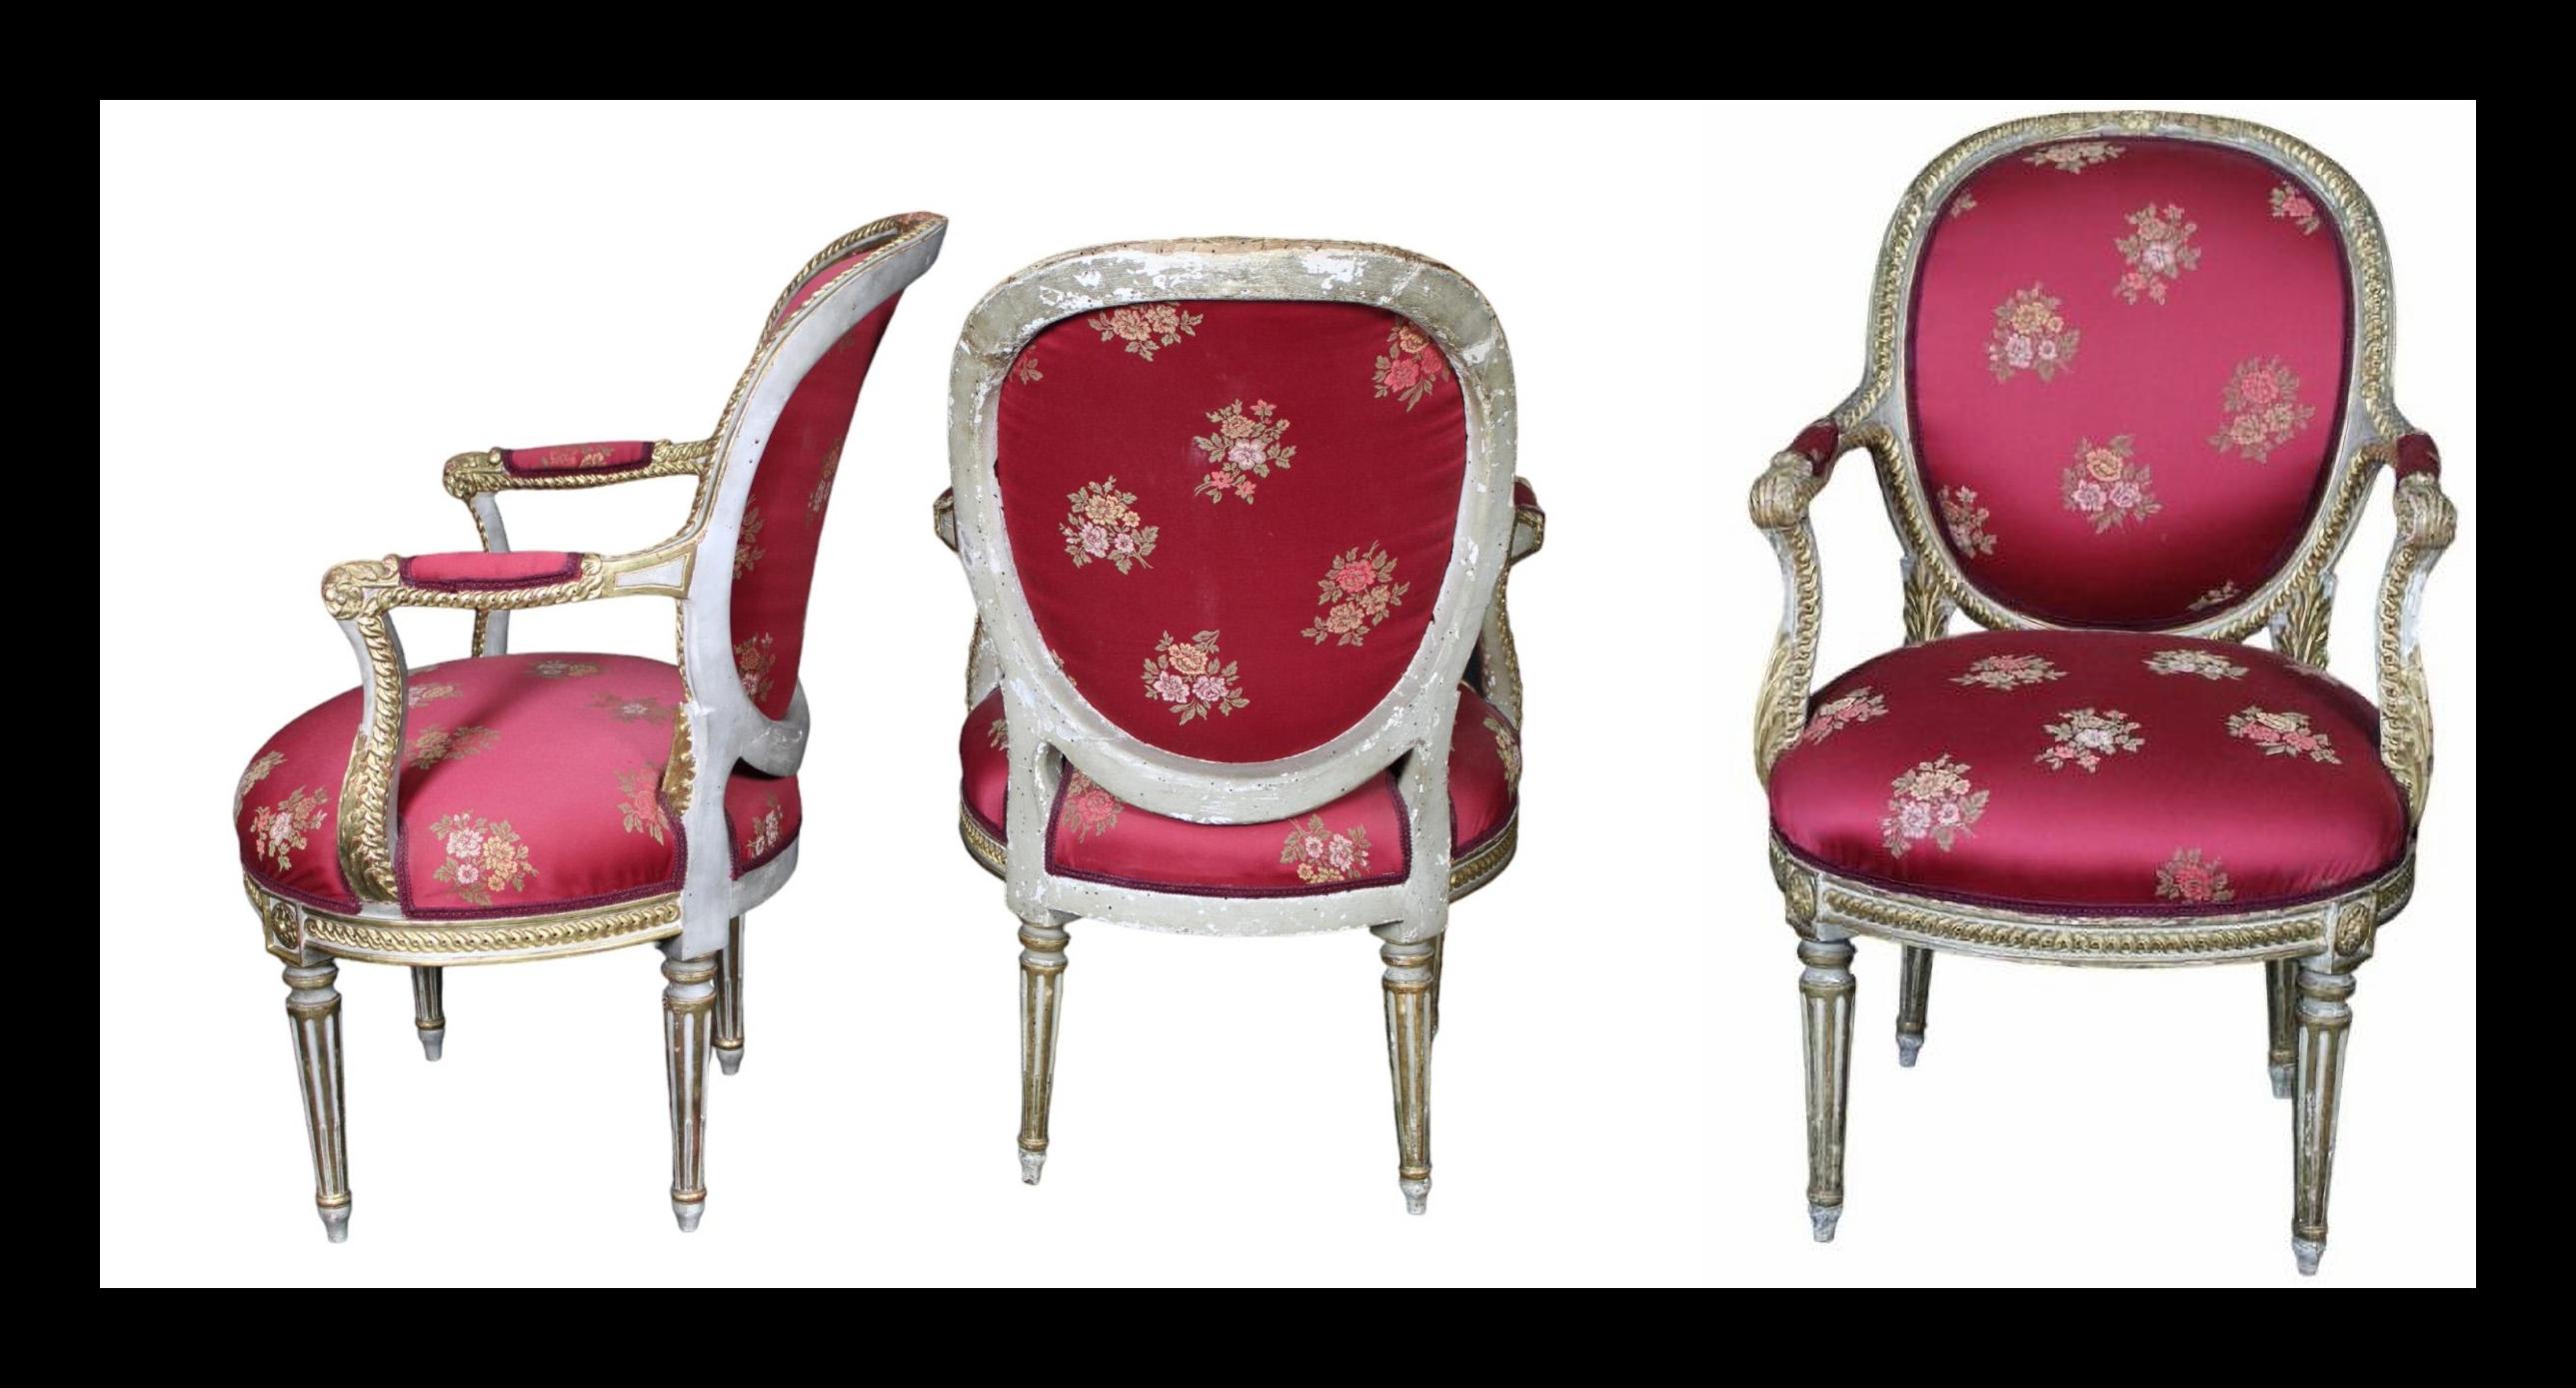 IMPORTANT PAIR OF ELEGANT 18th Century LOUIS XVI ARMCHAIRS
in lacquered wood and gilded with pure gold covered in Roma fabric
h 92 x 57 x 51 cm
original condition